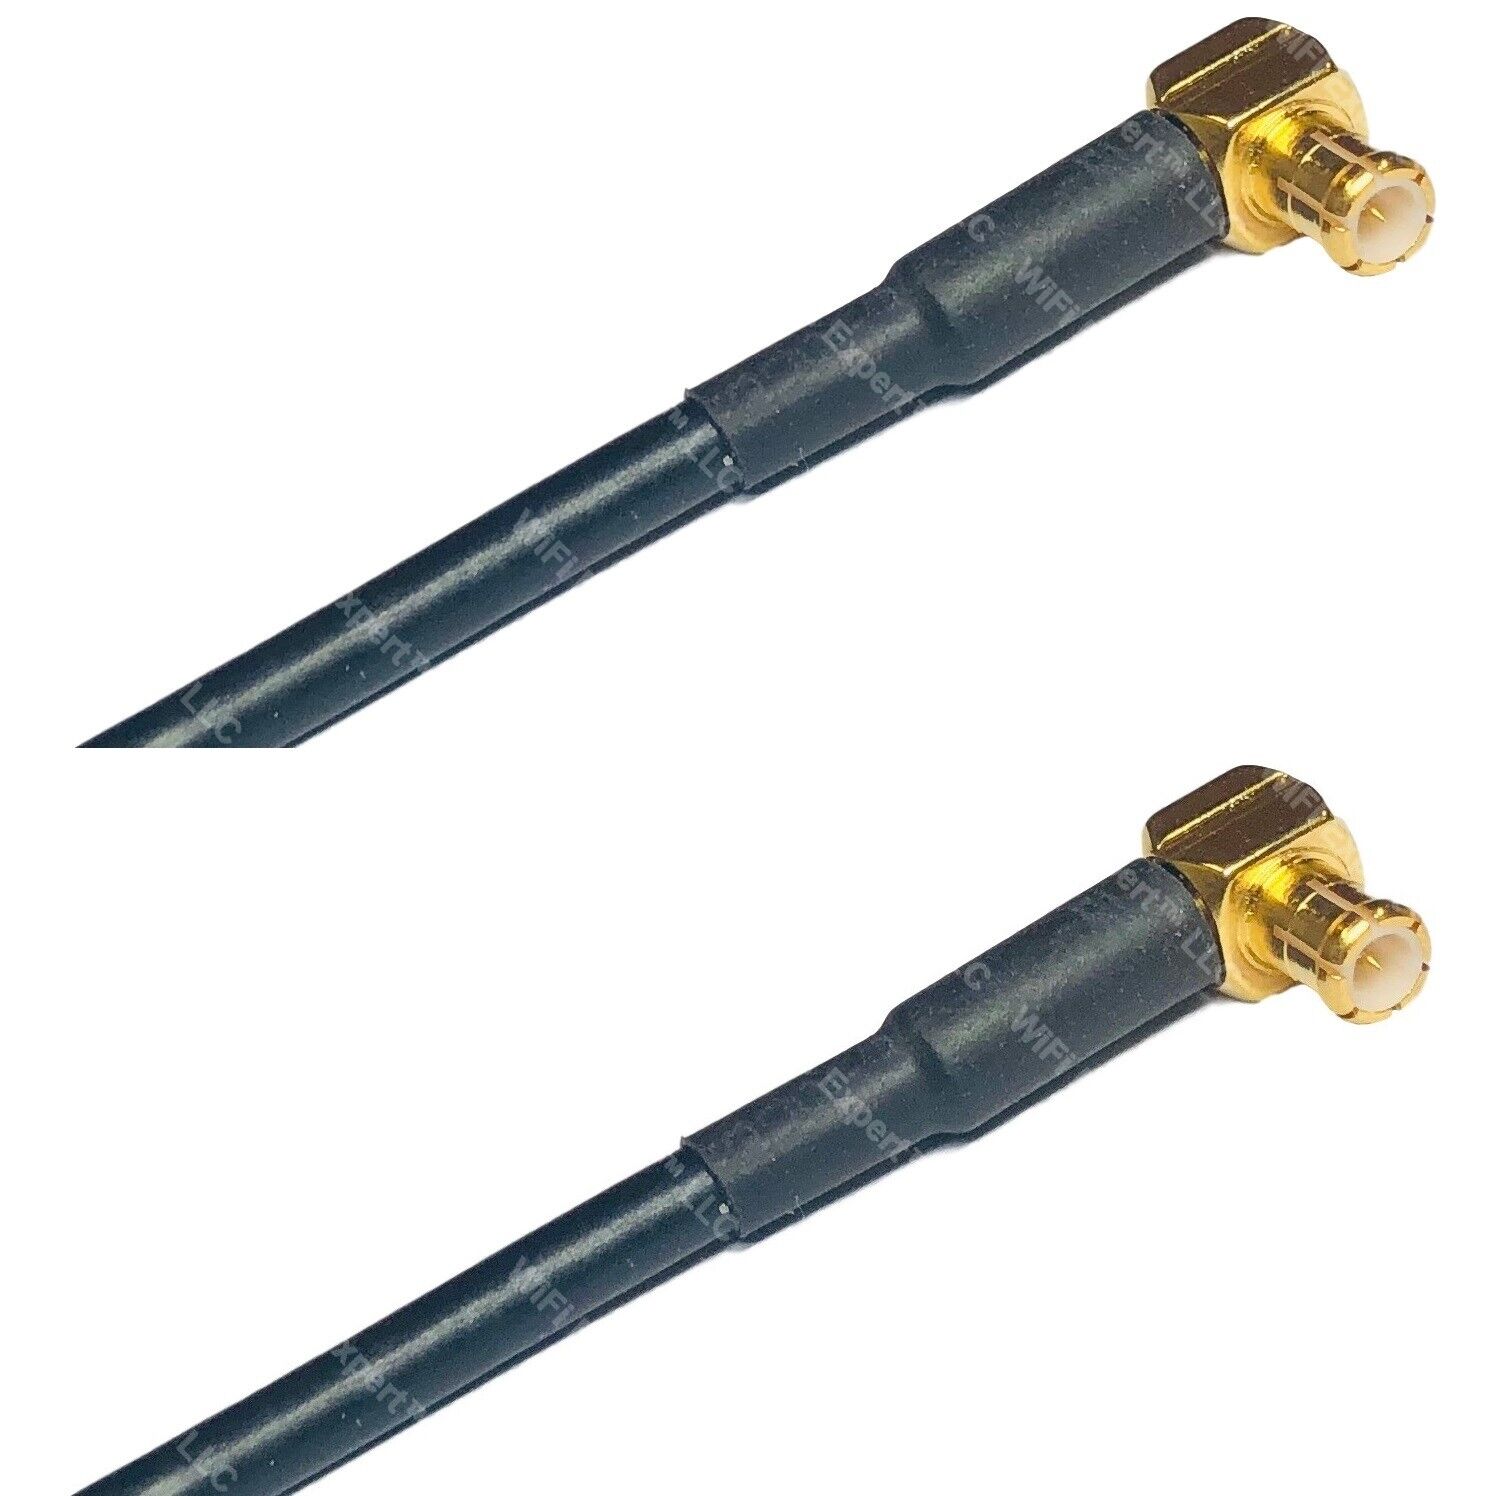 RG174 MCX MALE ANGLE to MCX MALE ANGLE Coax RF Cable Ships from USA